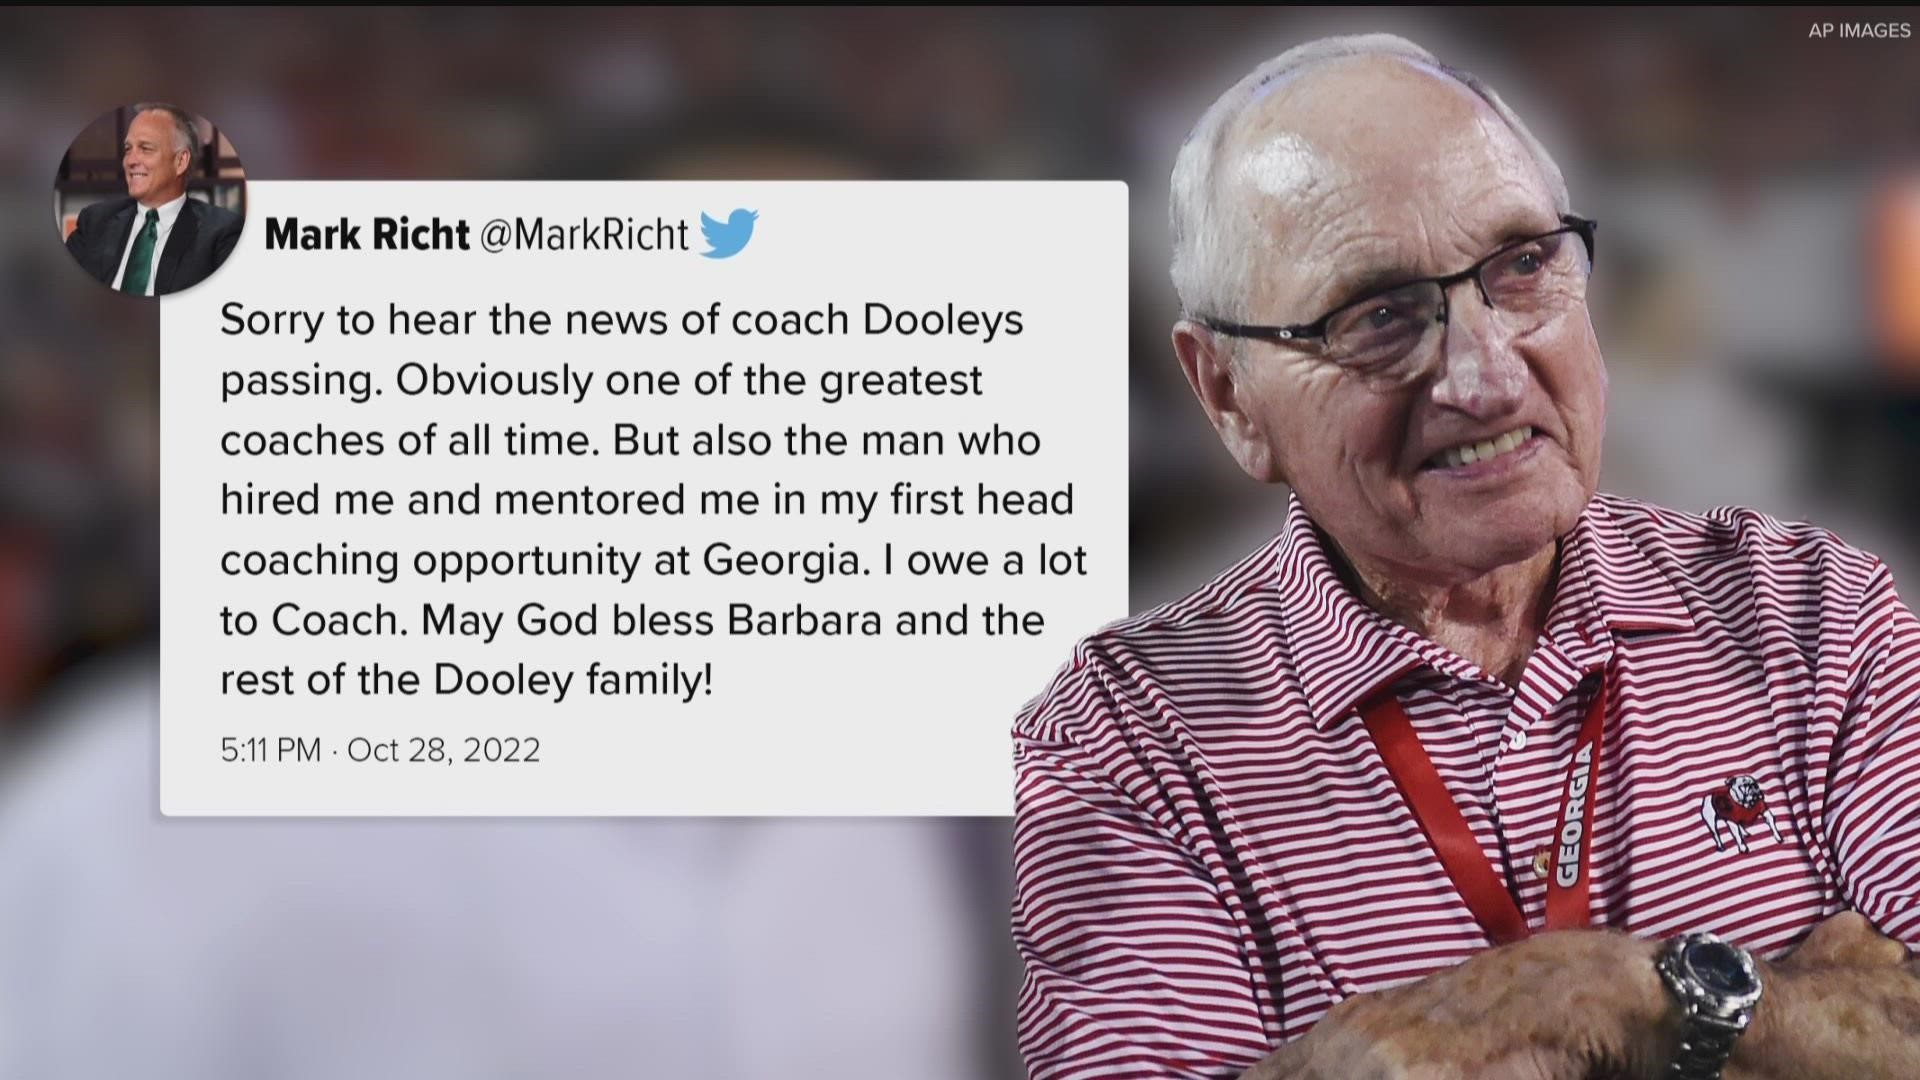 The college football world was delivered sad news on Friday when it learned the sudden death of legendary University of Georgia football coach Vince Dooley.